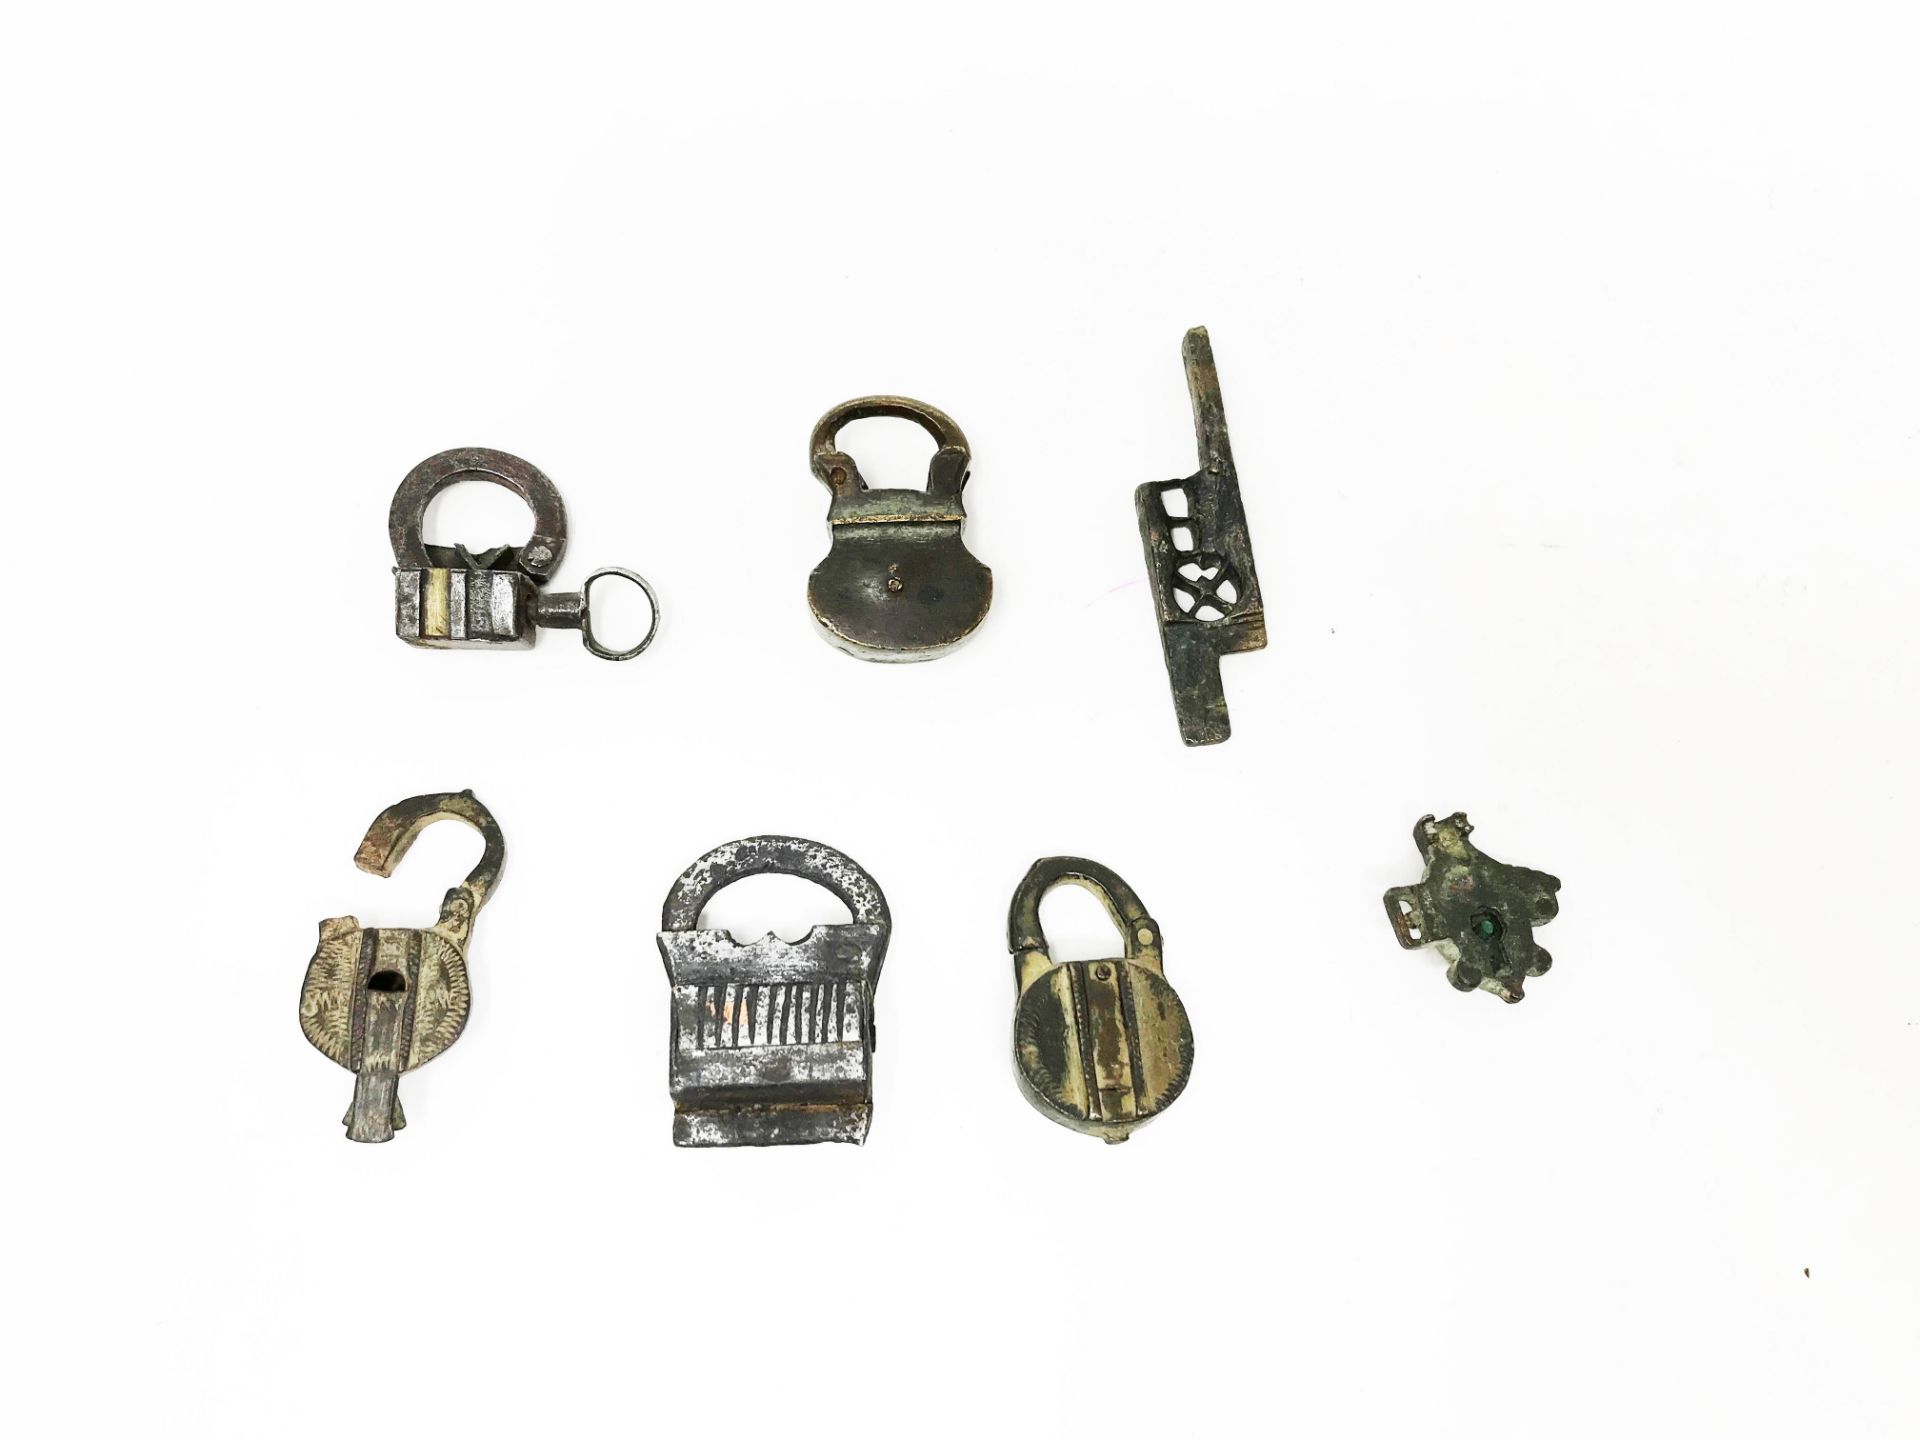 Six padlocks, two iron and four bronze and a lock bolt. H: 4, 48 cm - 3, 53 cm - 4, 96 cm - 5, 18 cm - Image 2 of 2